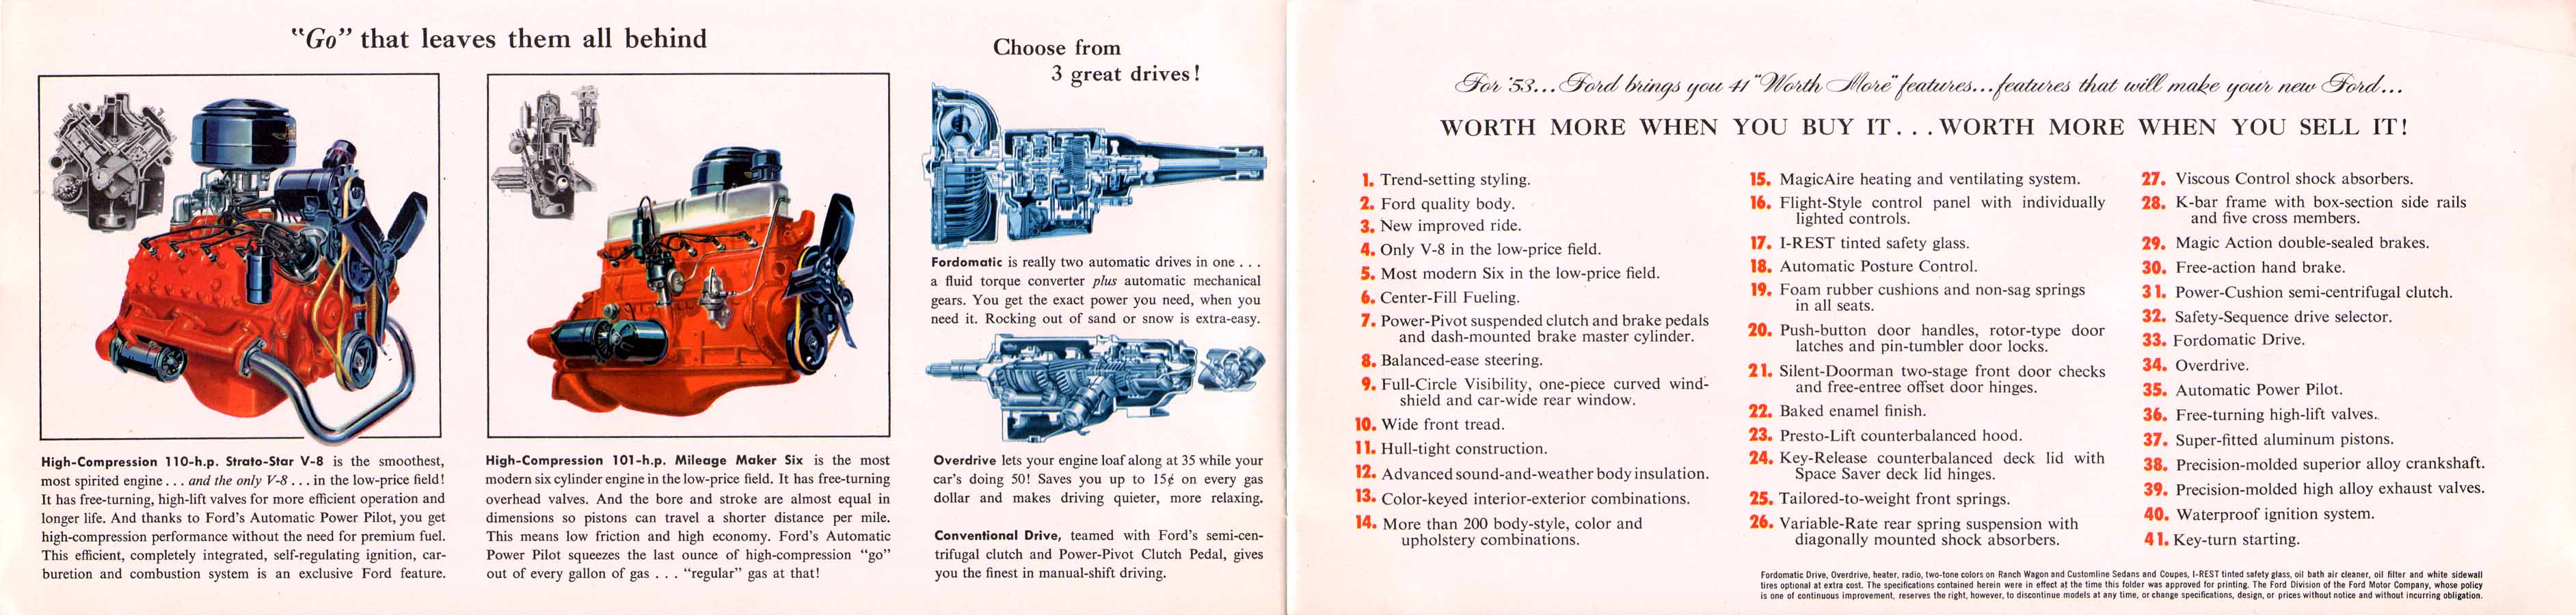 1953 Ford Brochure Page 2